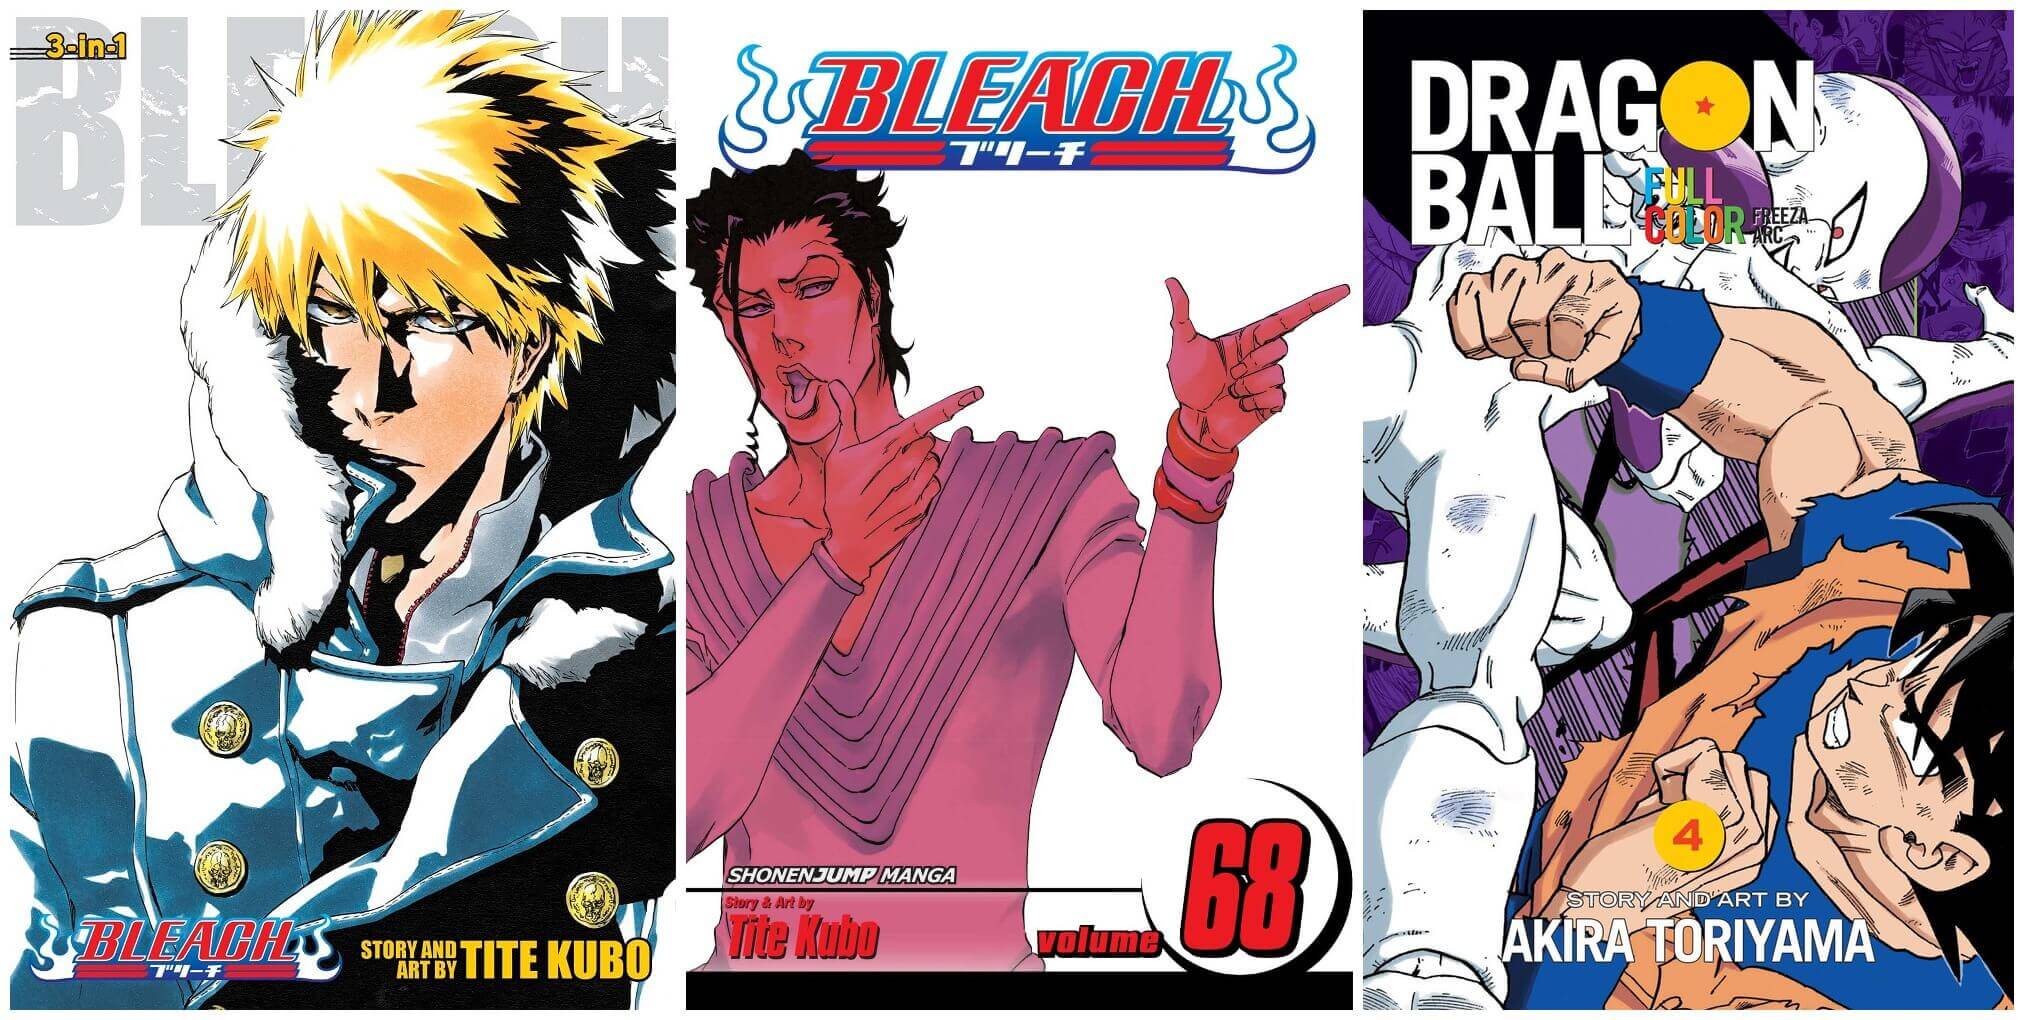 November 2016 Manga Releases Covers for Bleach 3-in-1, Bleach, and Dragon Ball Color.